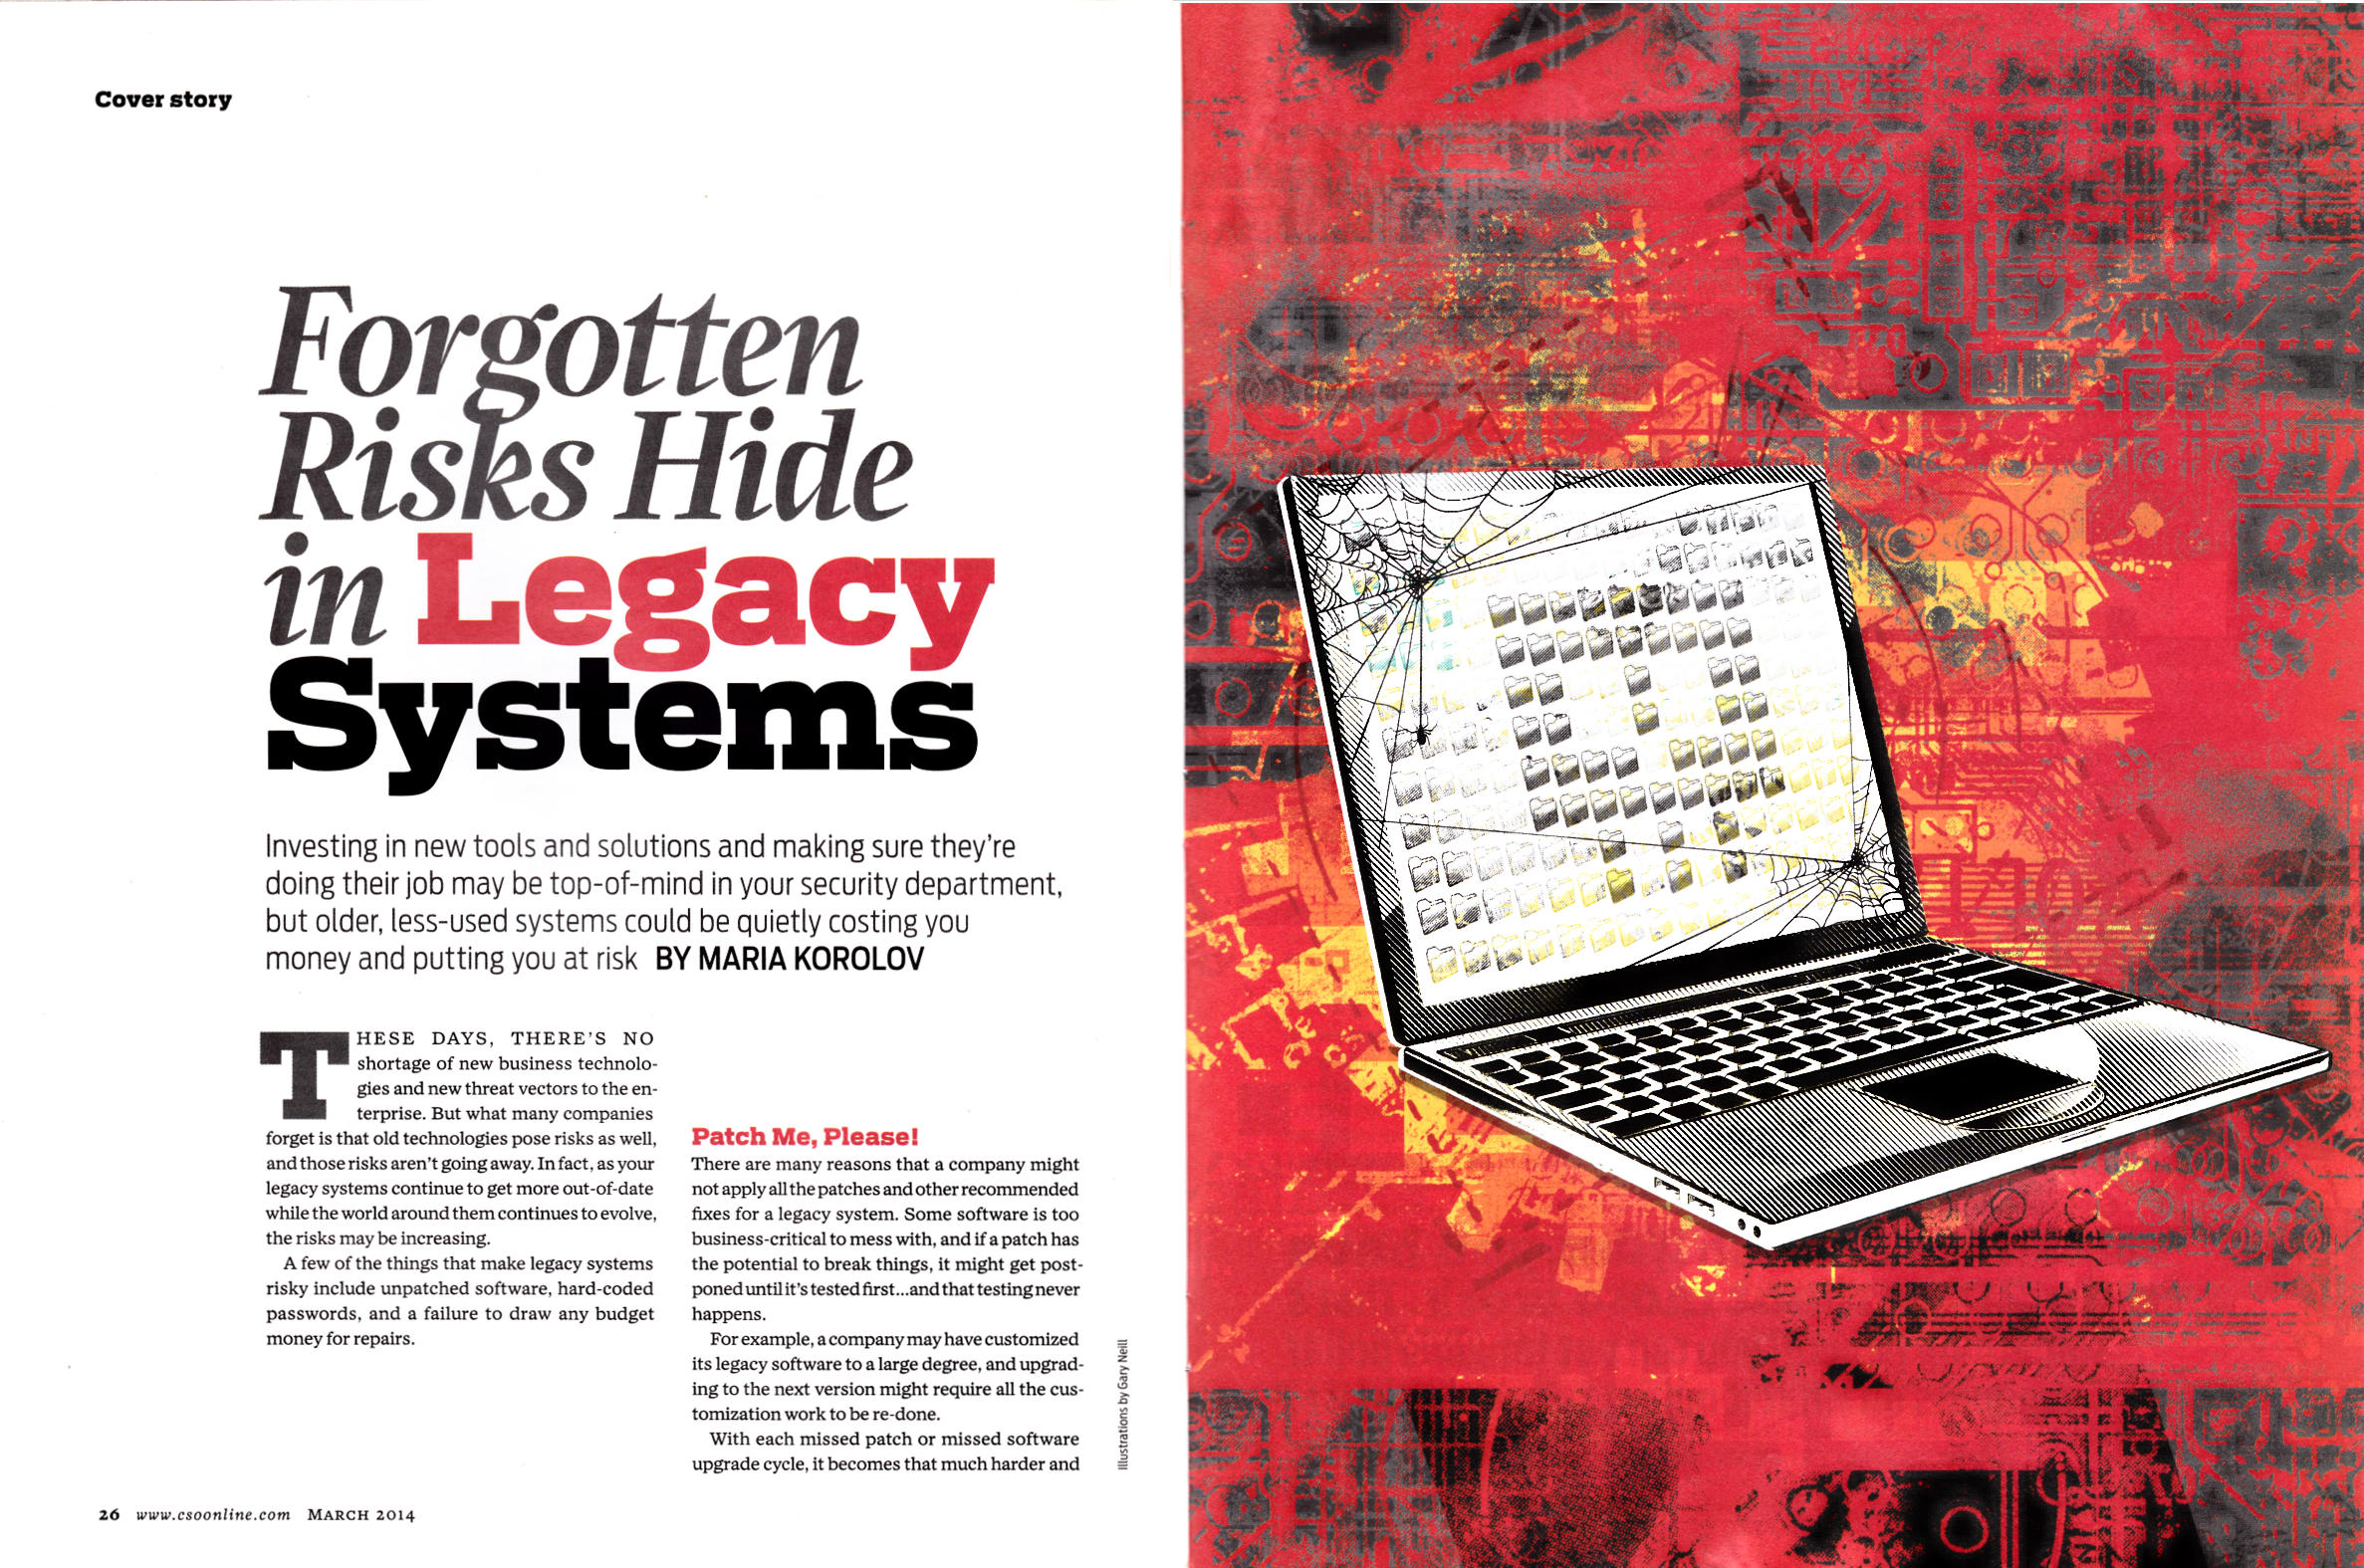 Forgotten risks hide in legacy systems